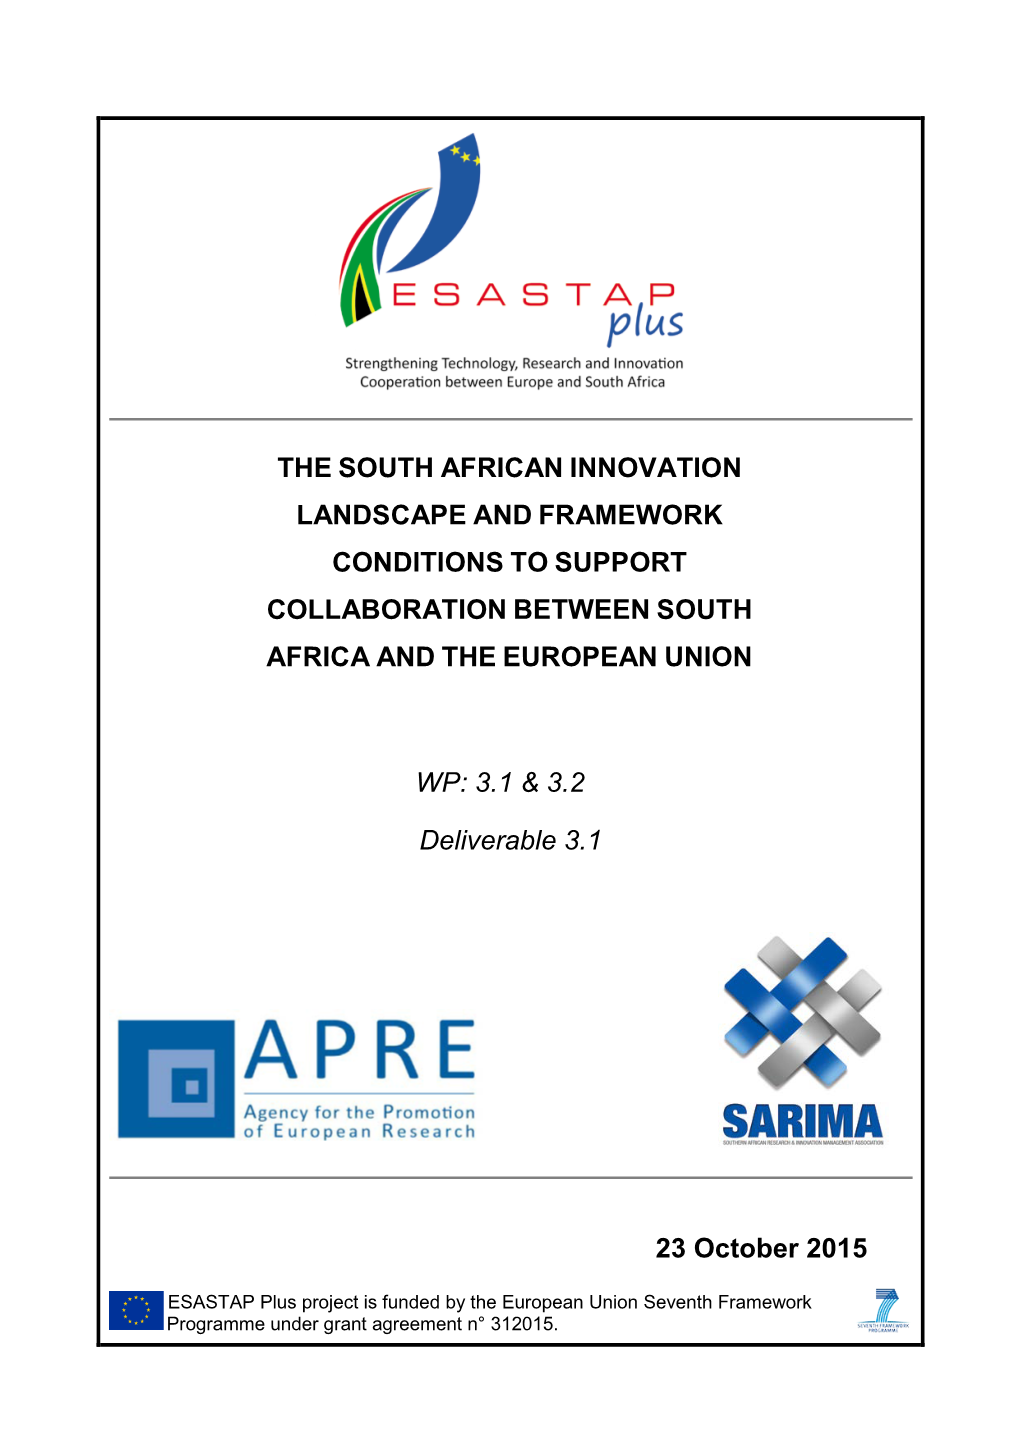 South African Innovation Landscape and Framework Conditions for SA